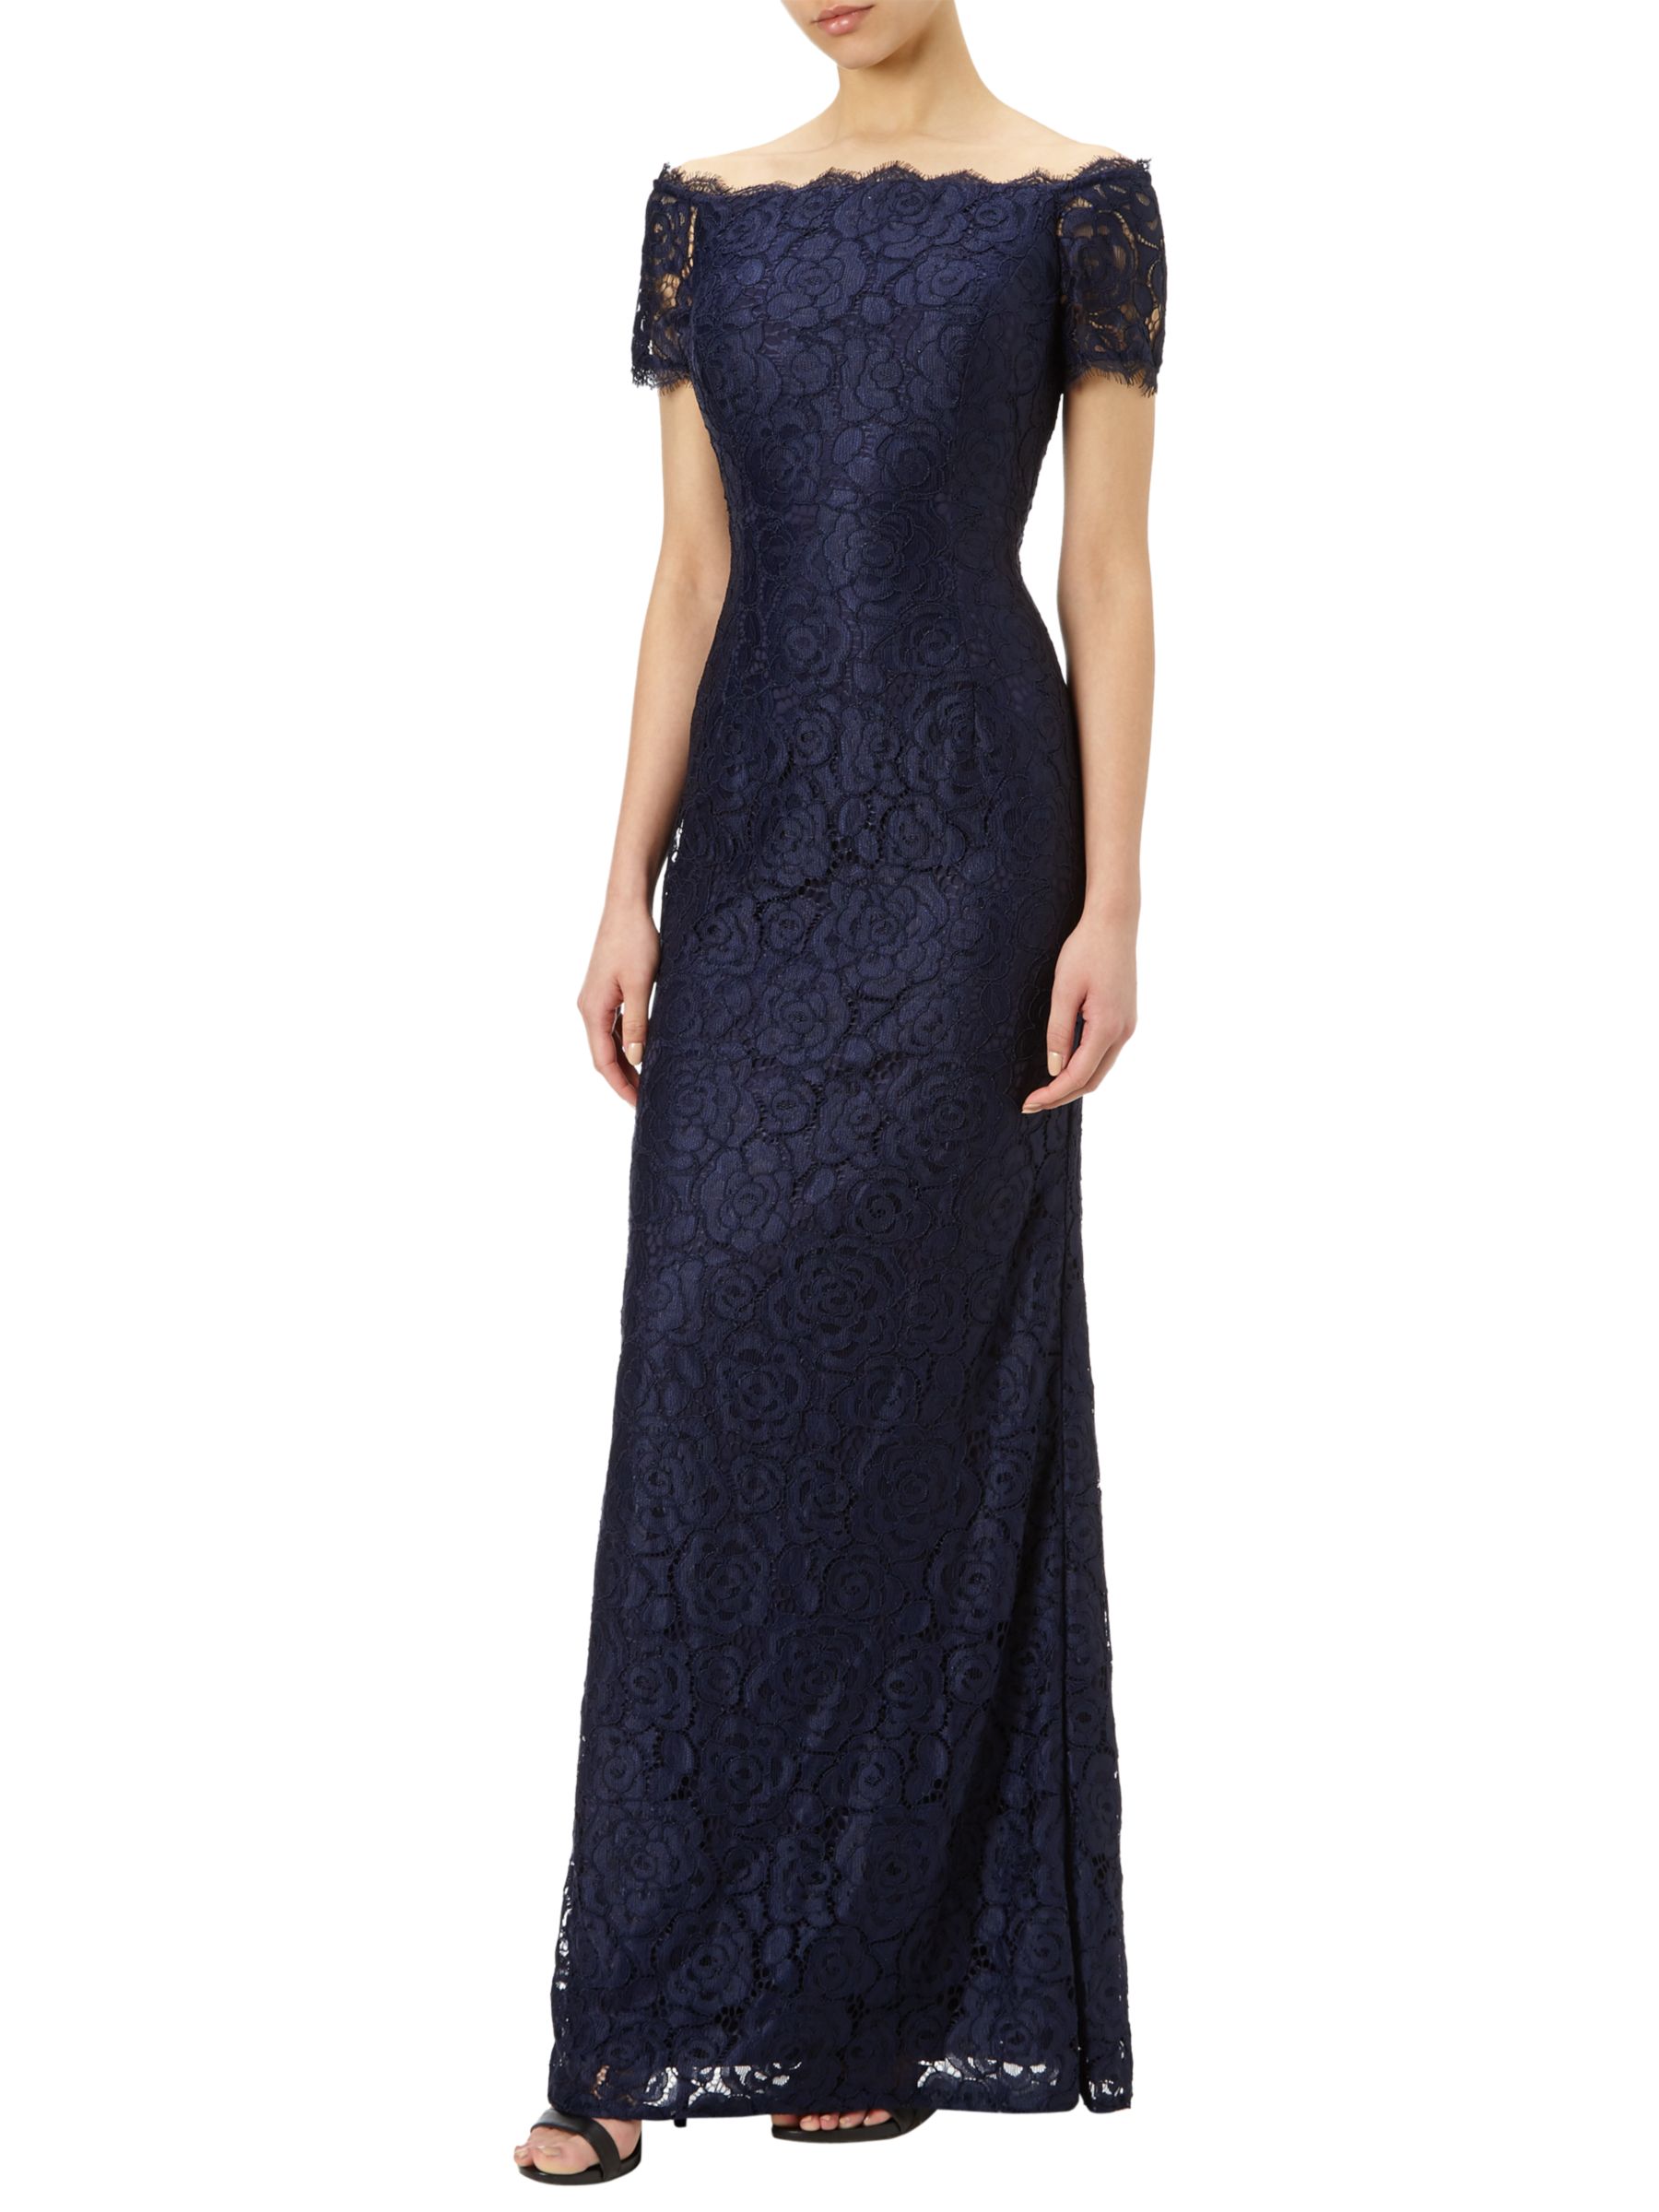 Adrianna Papell Off Shoulder Lace Gown, Midnight